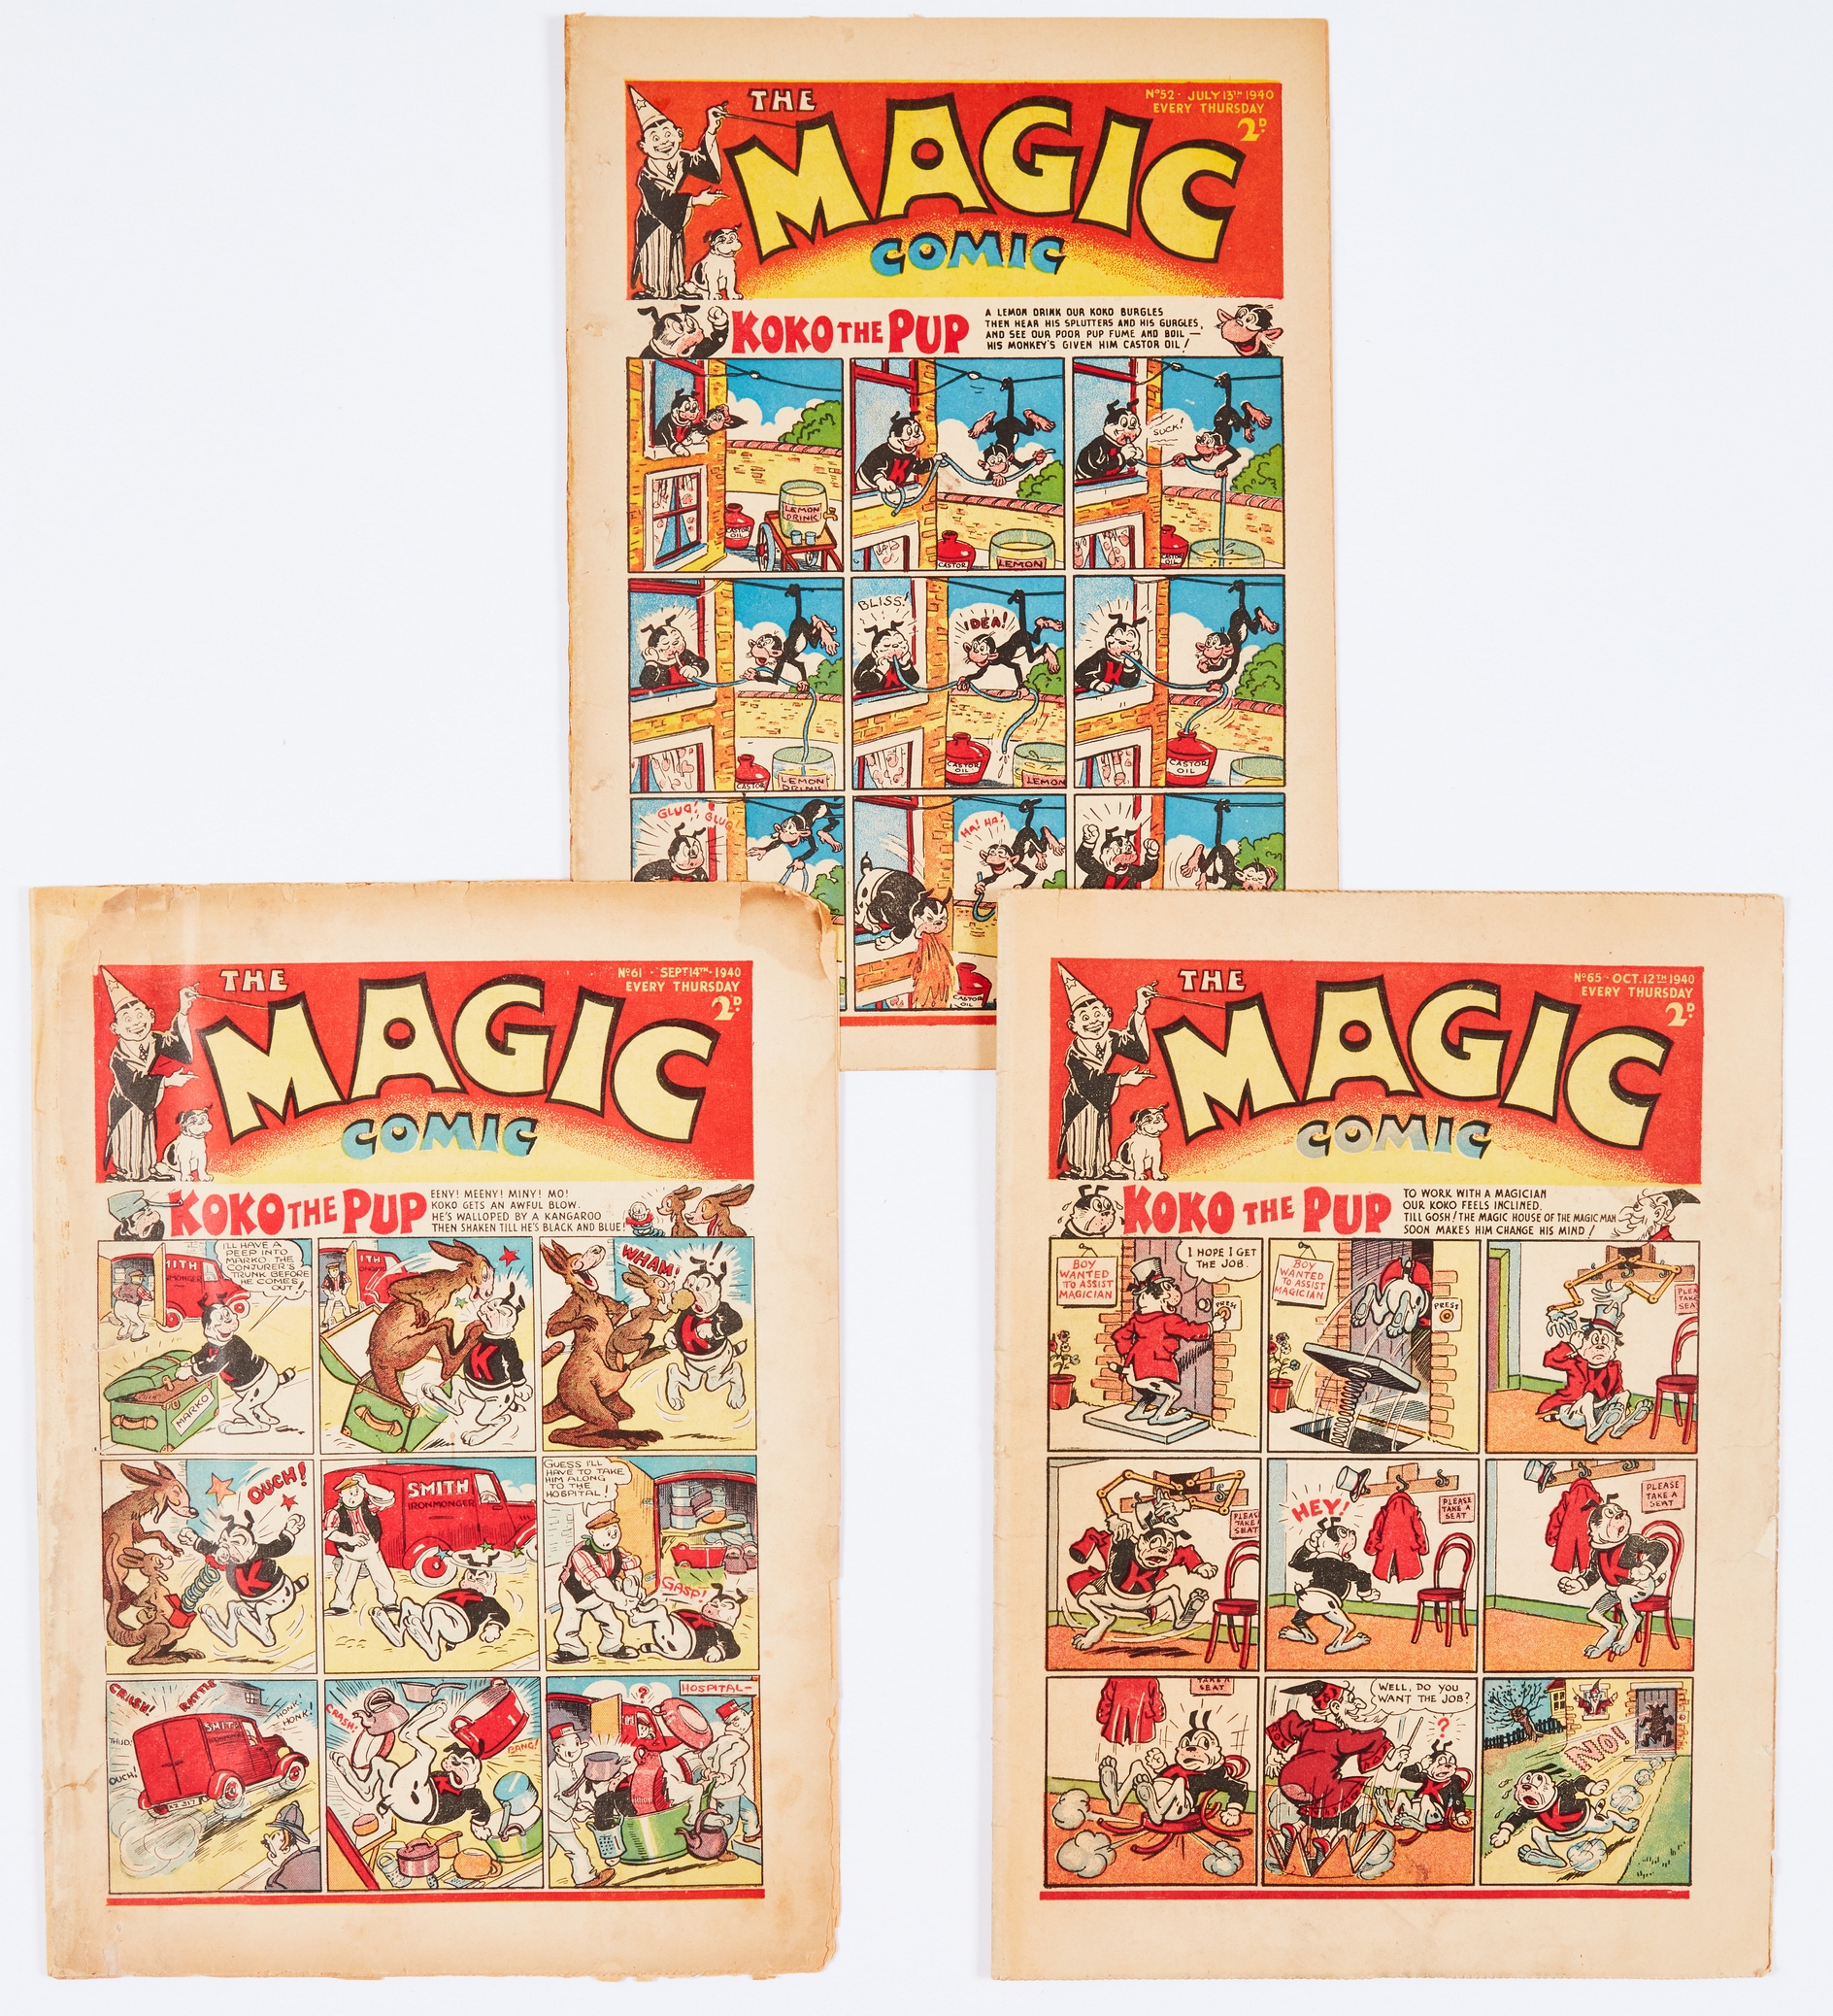 Magic Comic (1940) 52, 61, 65. Propaganda war issues with Herr Paul Pry (the Nasty Spy), the first